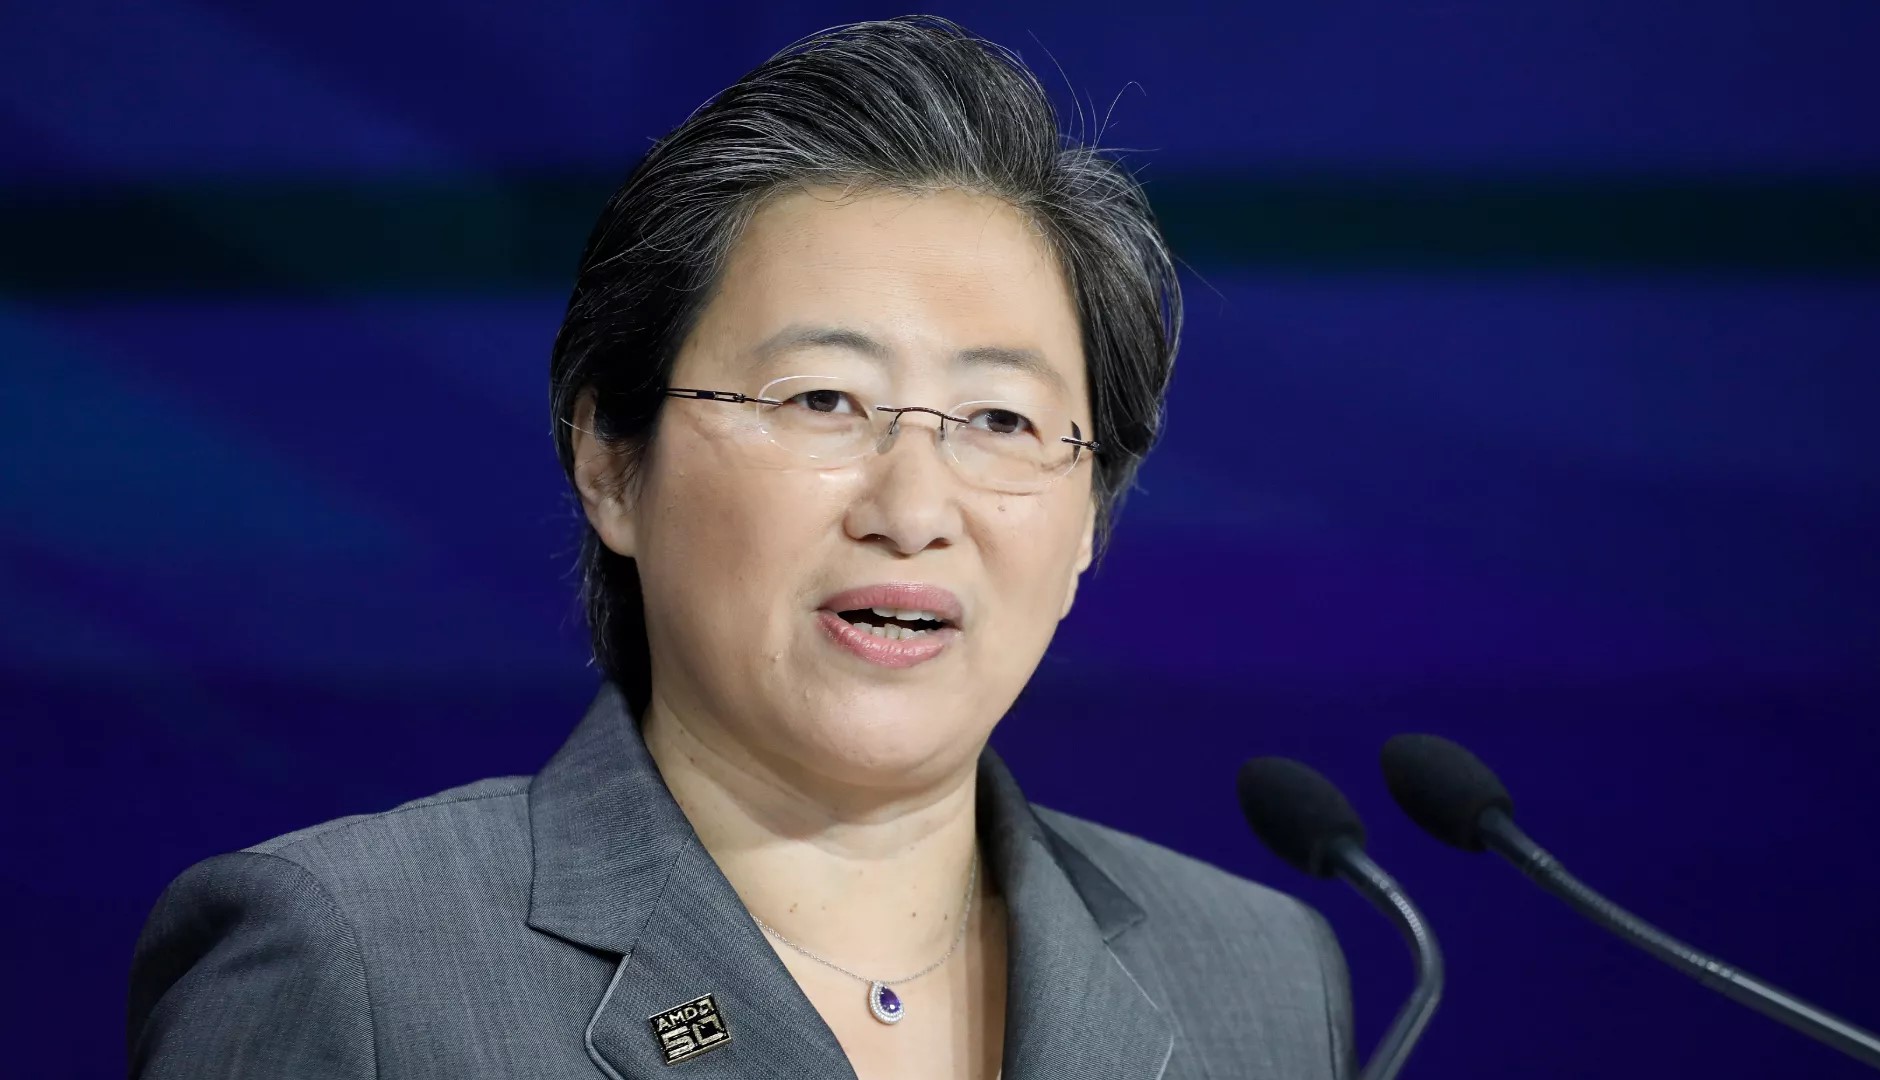 The first highest-earning female CEO in the world was she: Who is Lisa Su?